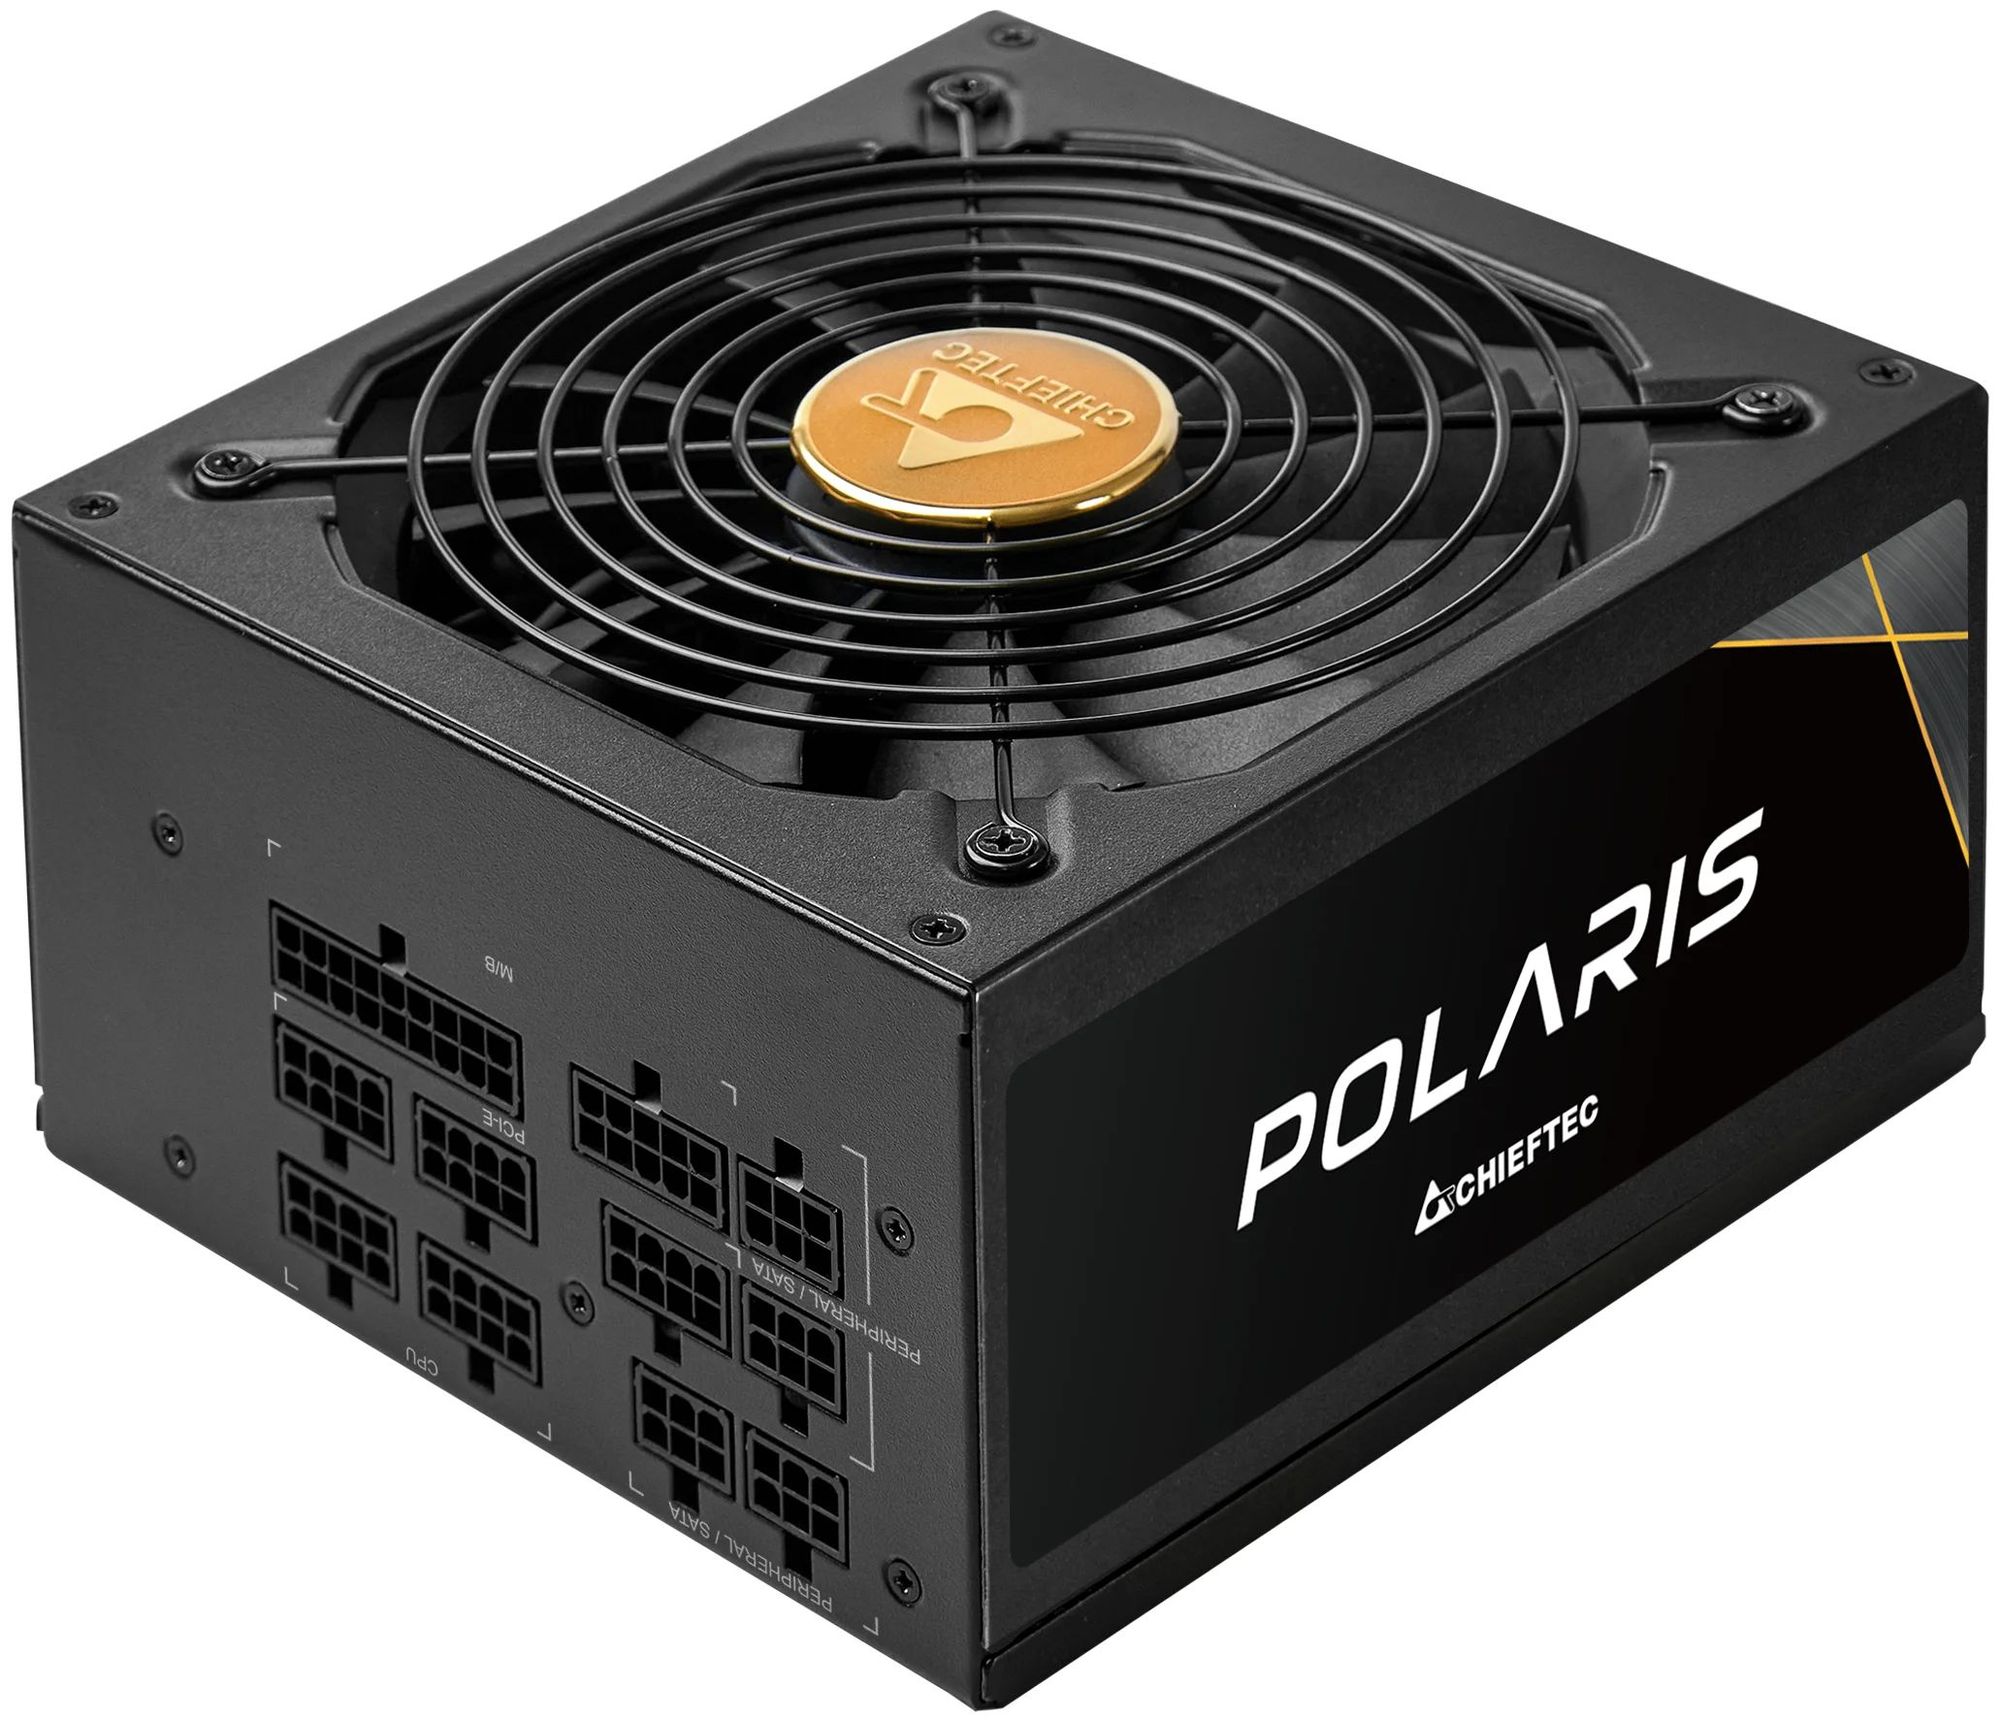 Chieftec Polaris 3.0 PPS-850FC-A3 850W 80 PLUS GOLD chieftec chieftronic powerplay gpu 850fc atx 2 3 850w 80 plus platinum active pfc 140mm fan full cable management llc design japanese capacito